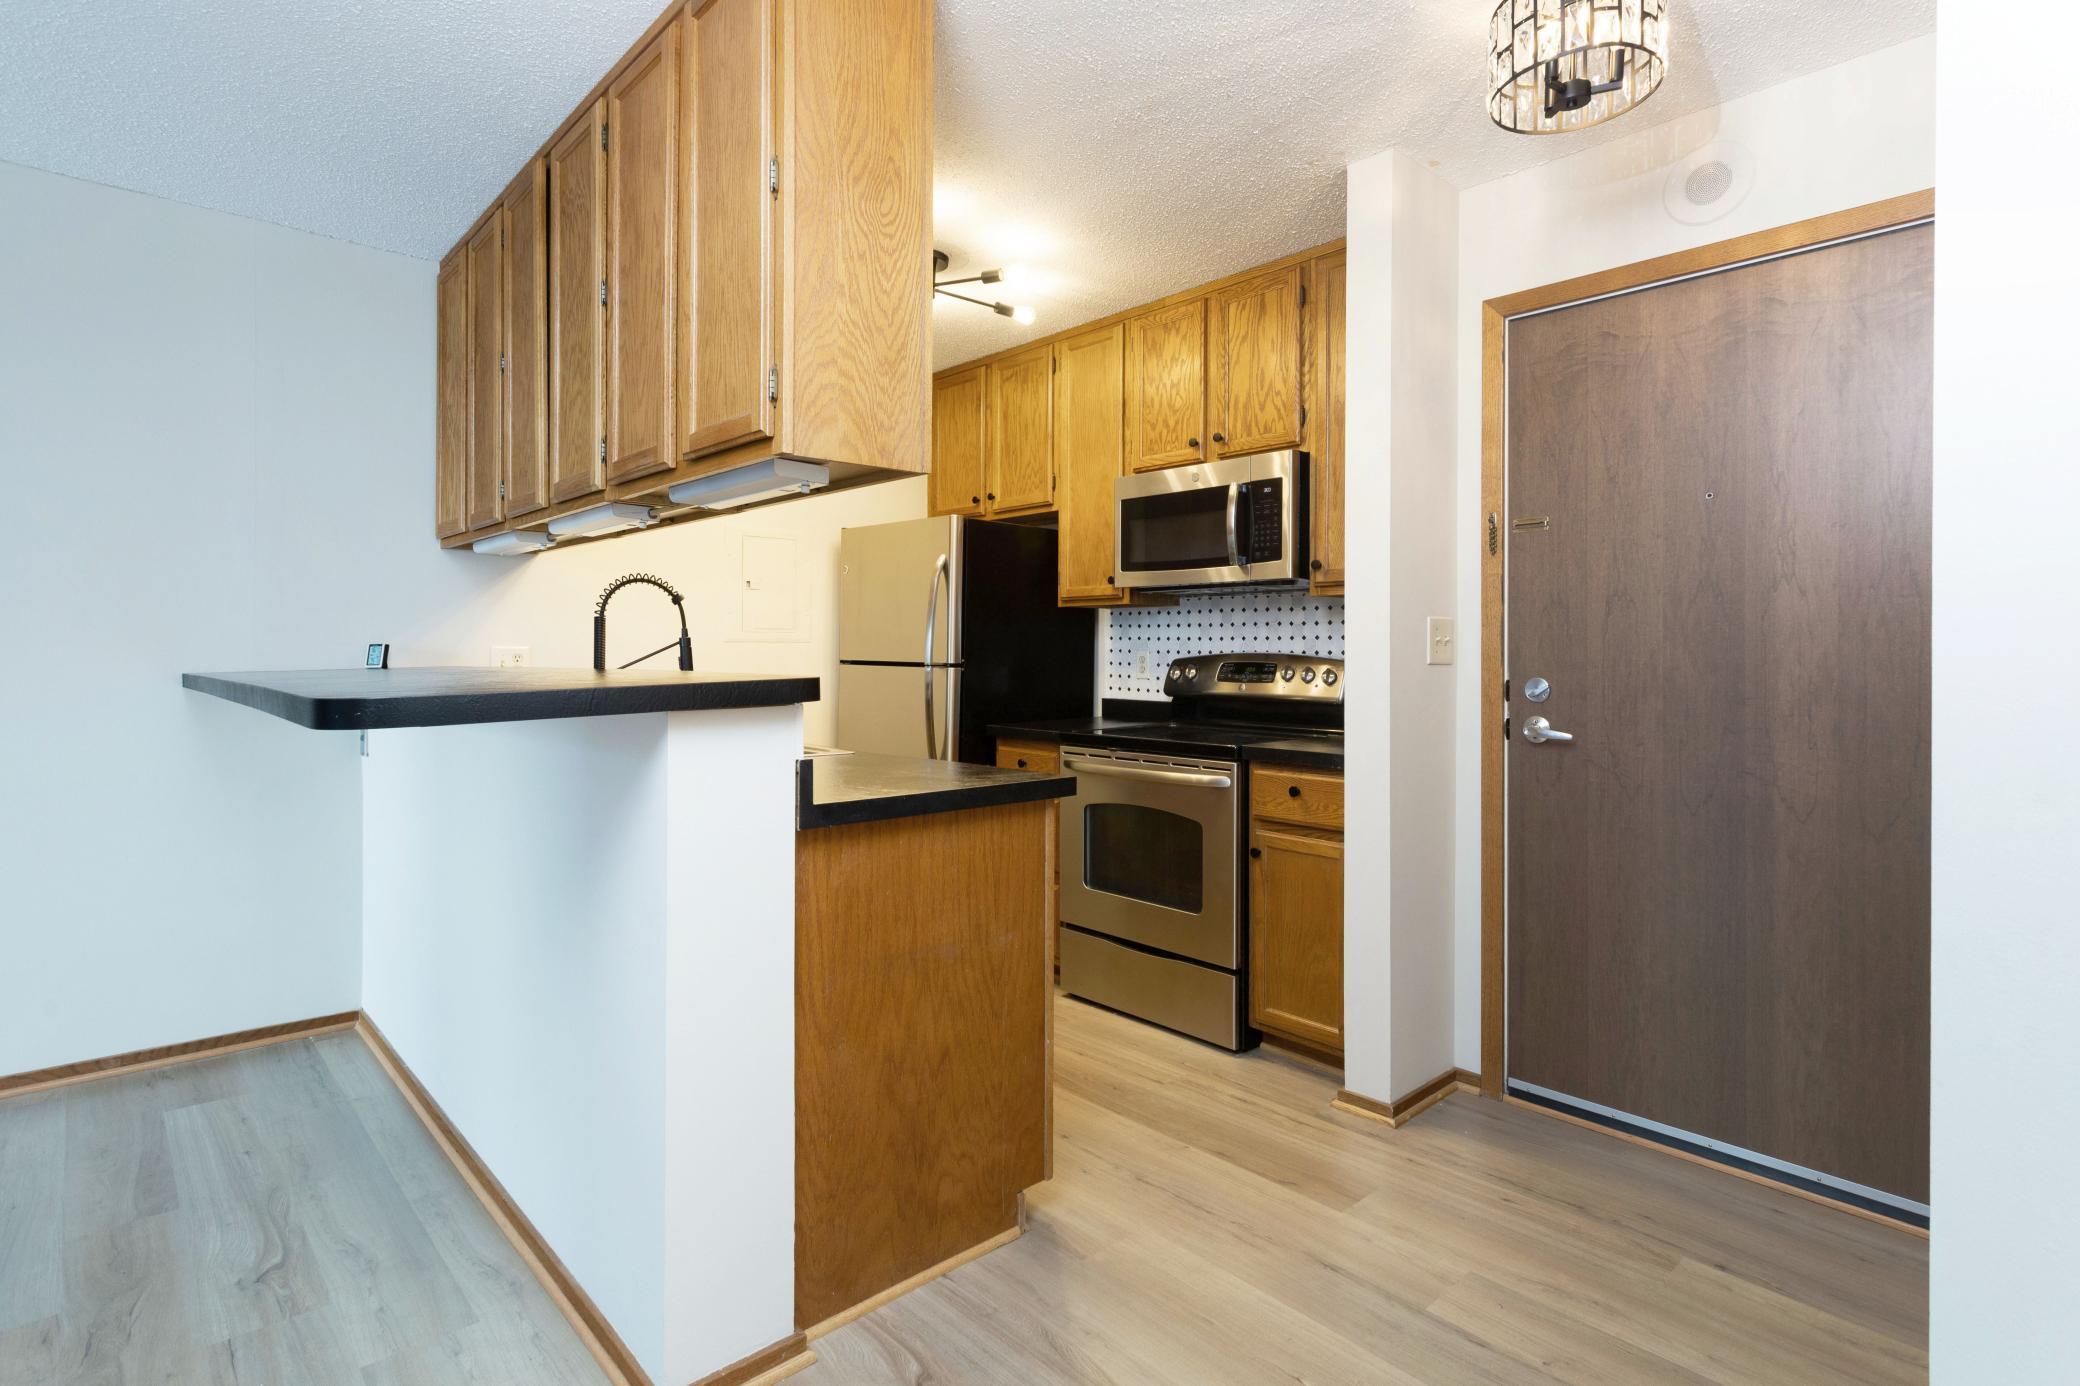 Updated condo in the heart of downtown -- Pack your boxes and move in!